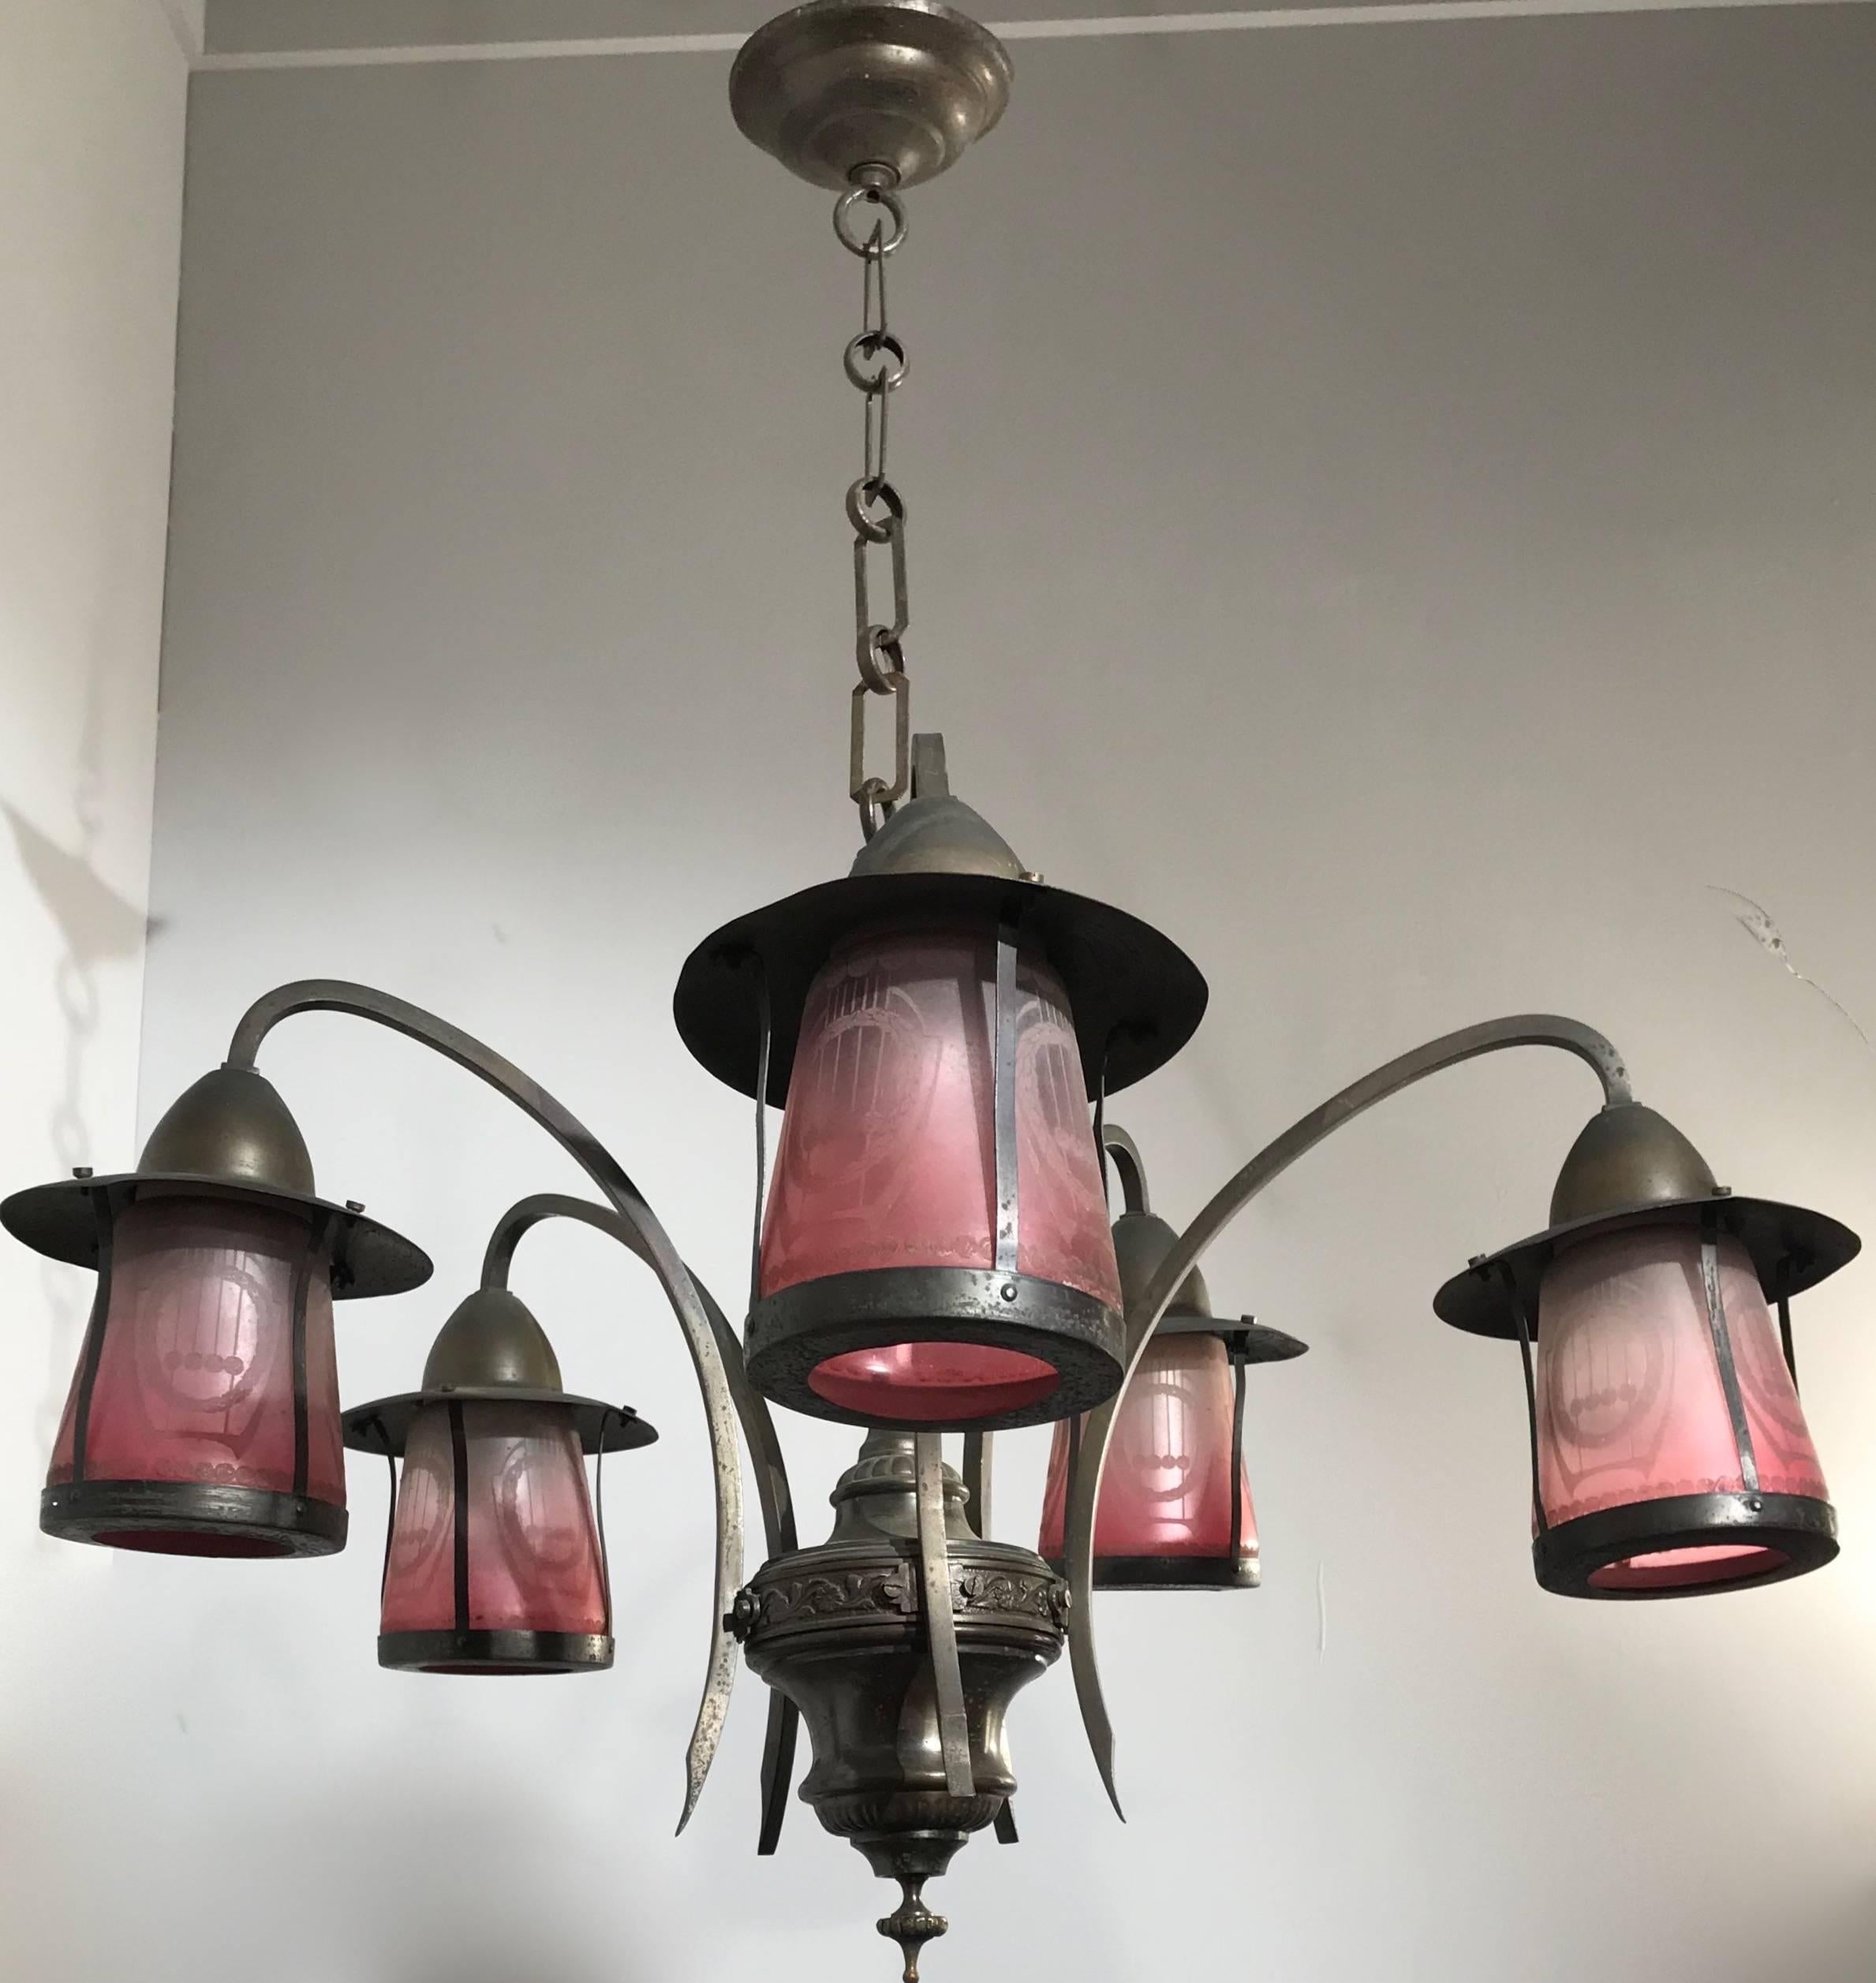 Beautiful and rare Arts & Crafts chandelier.

This light fixture from the heydays of the Arts and Crafts period comes with the original glass shades. These wonderfully colored shades come with highly stylish, accid etched motifs. Unfortunately we